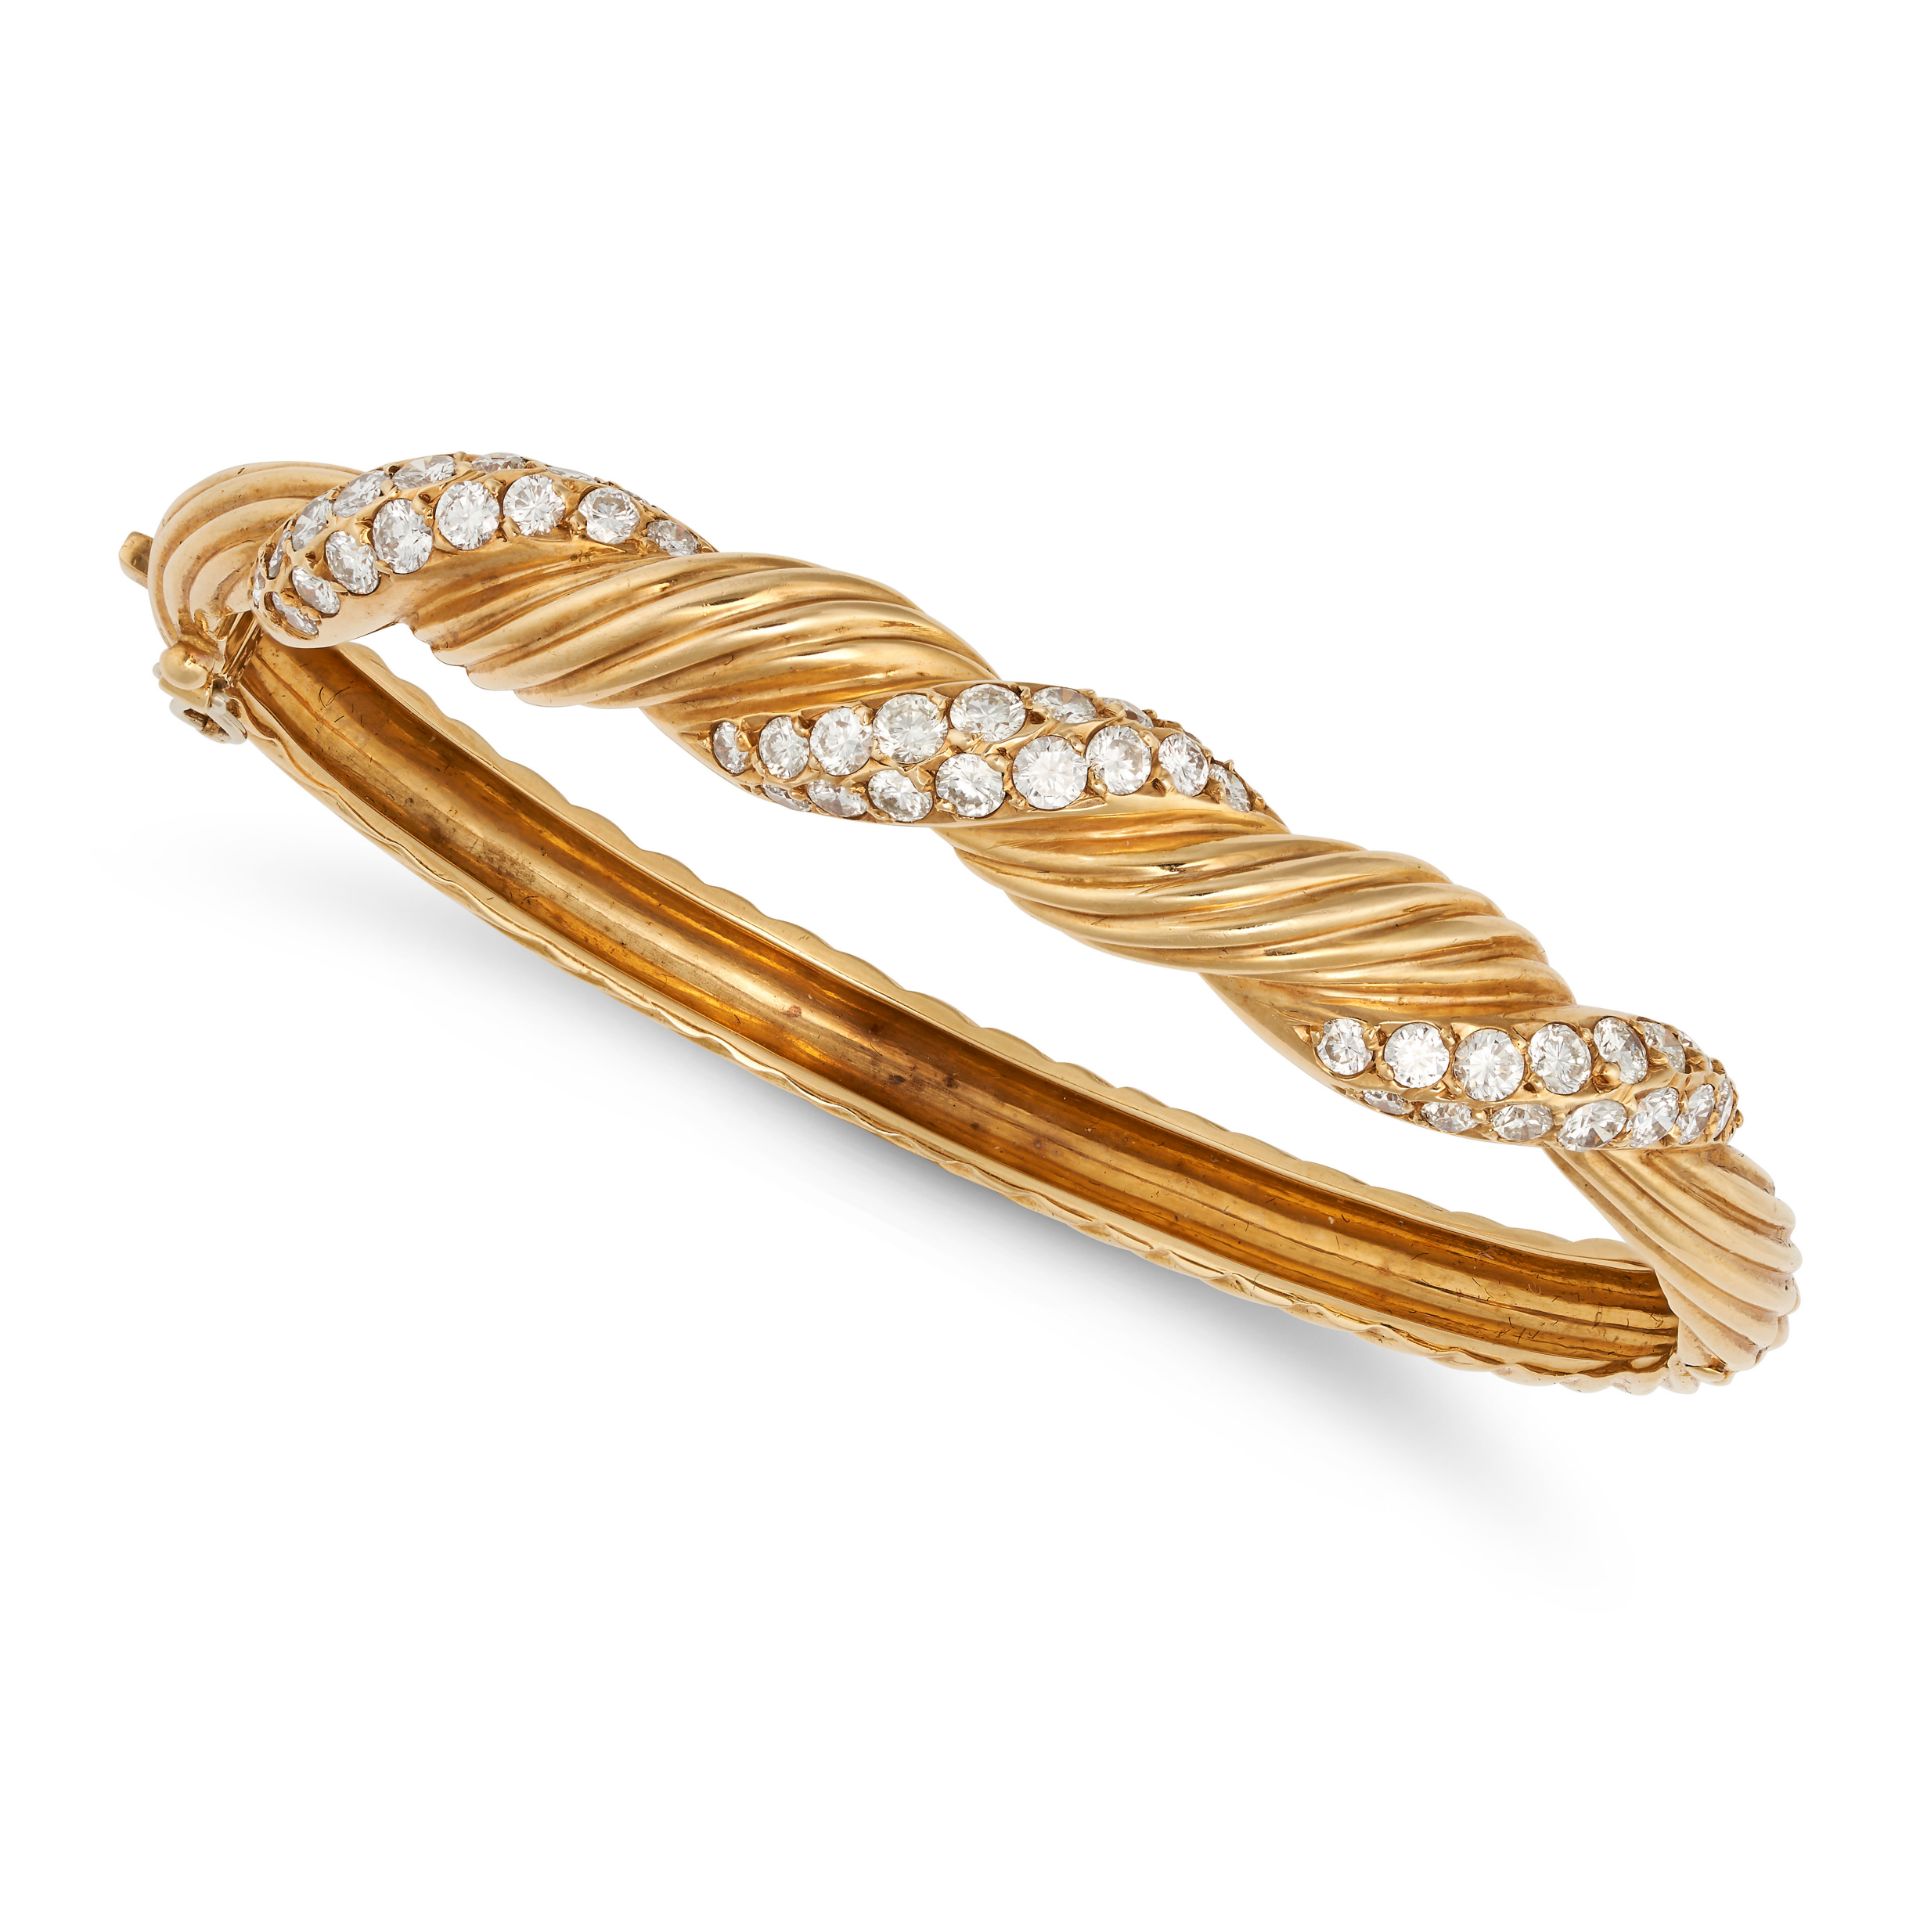 VAN CLEEF & ARPELS, A DIAMOND BANGLE in 18ct yellow gold, the twisted hinged bangle accented by s...